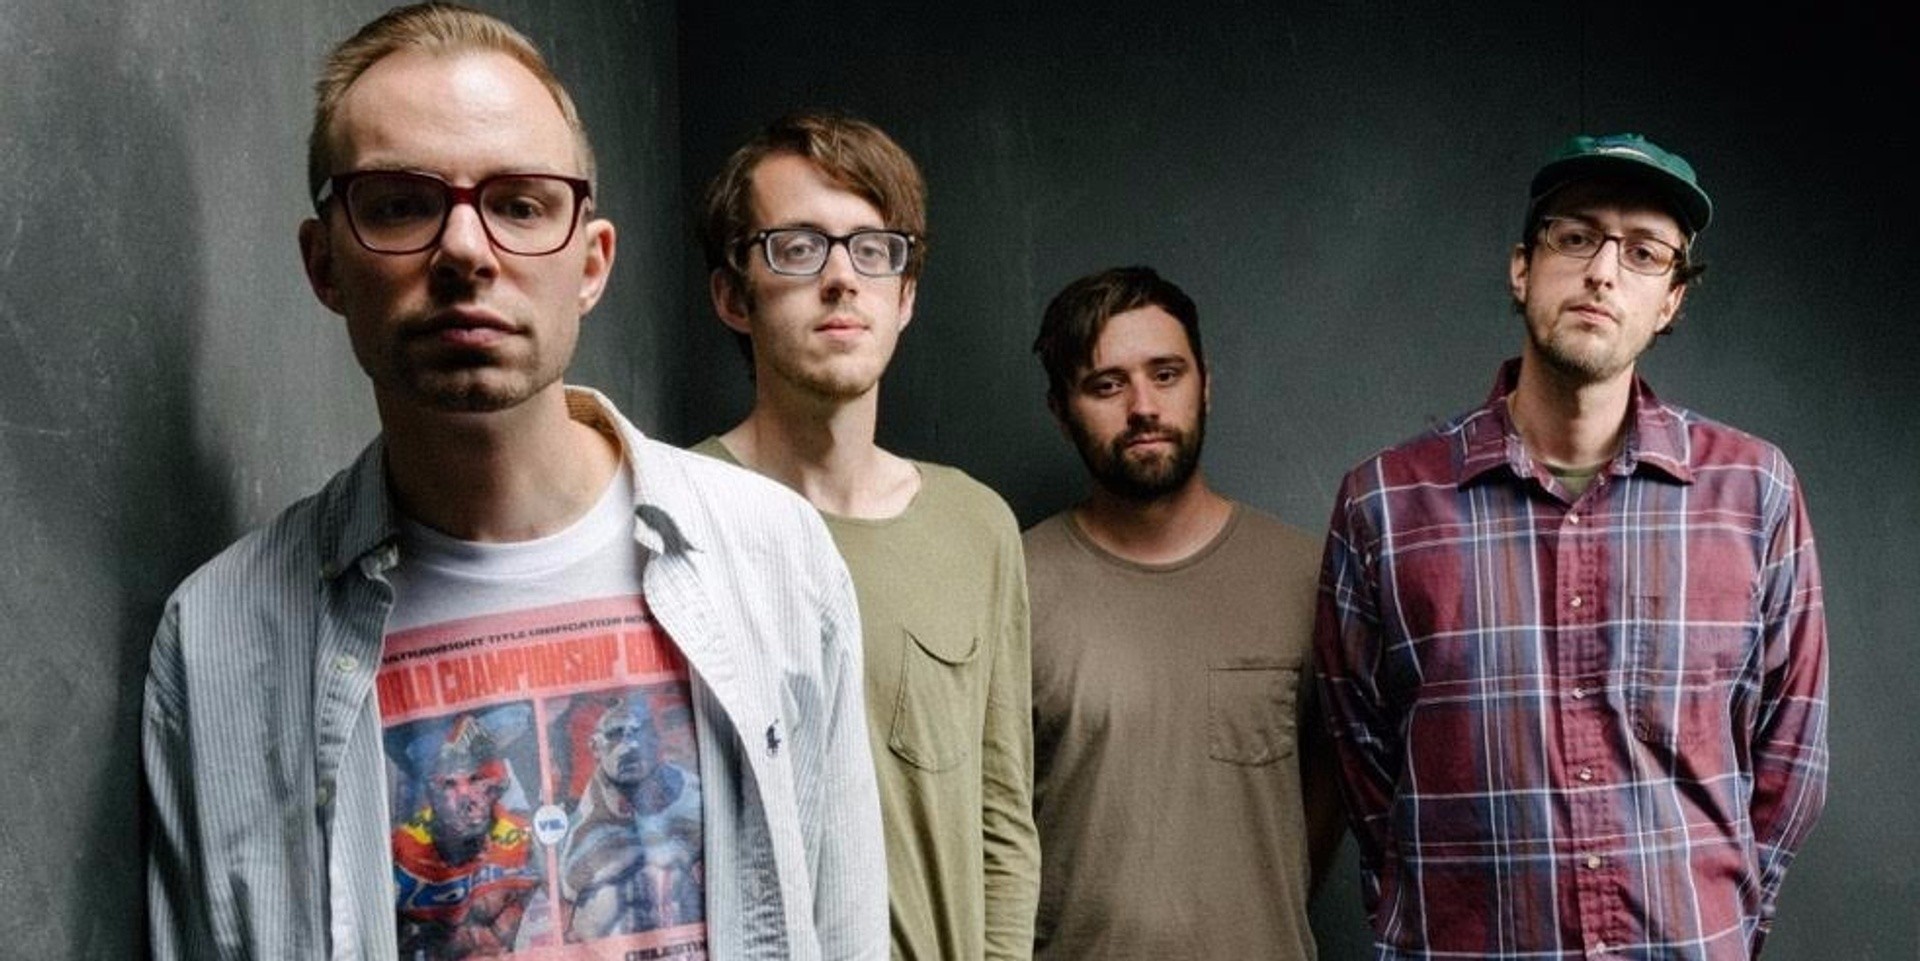 Cloud Nothings return to Singapore for a headlining concert